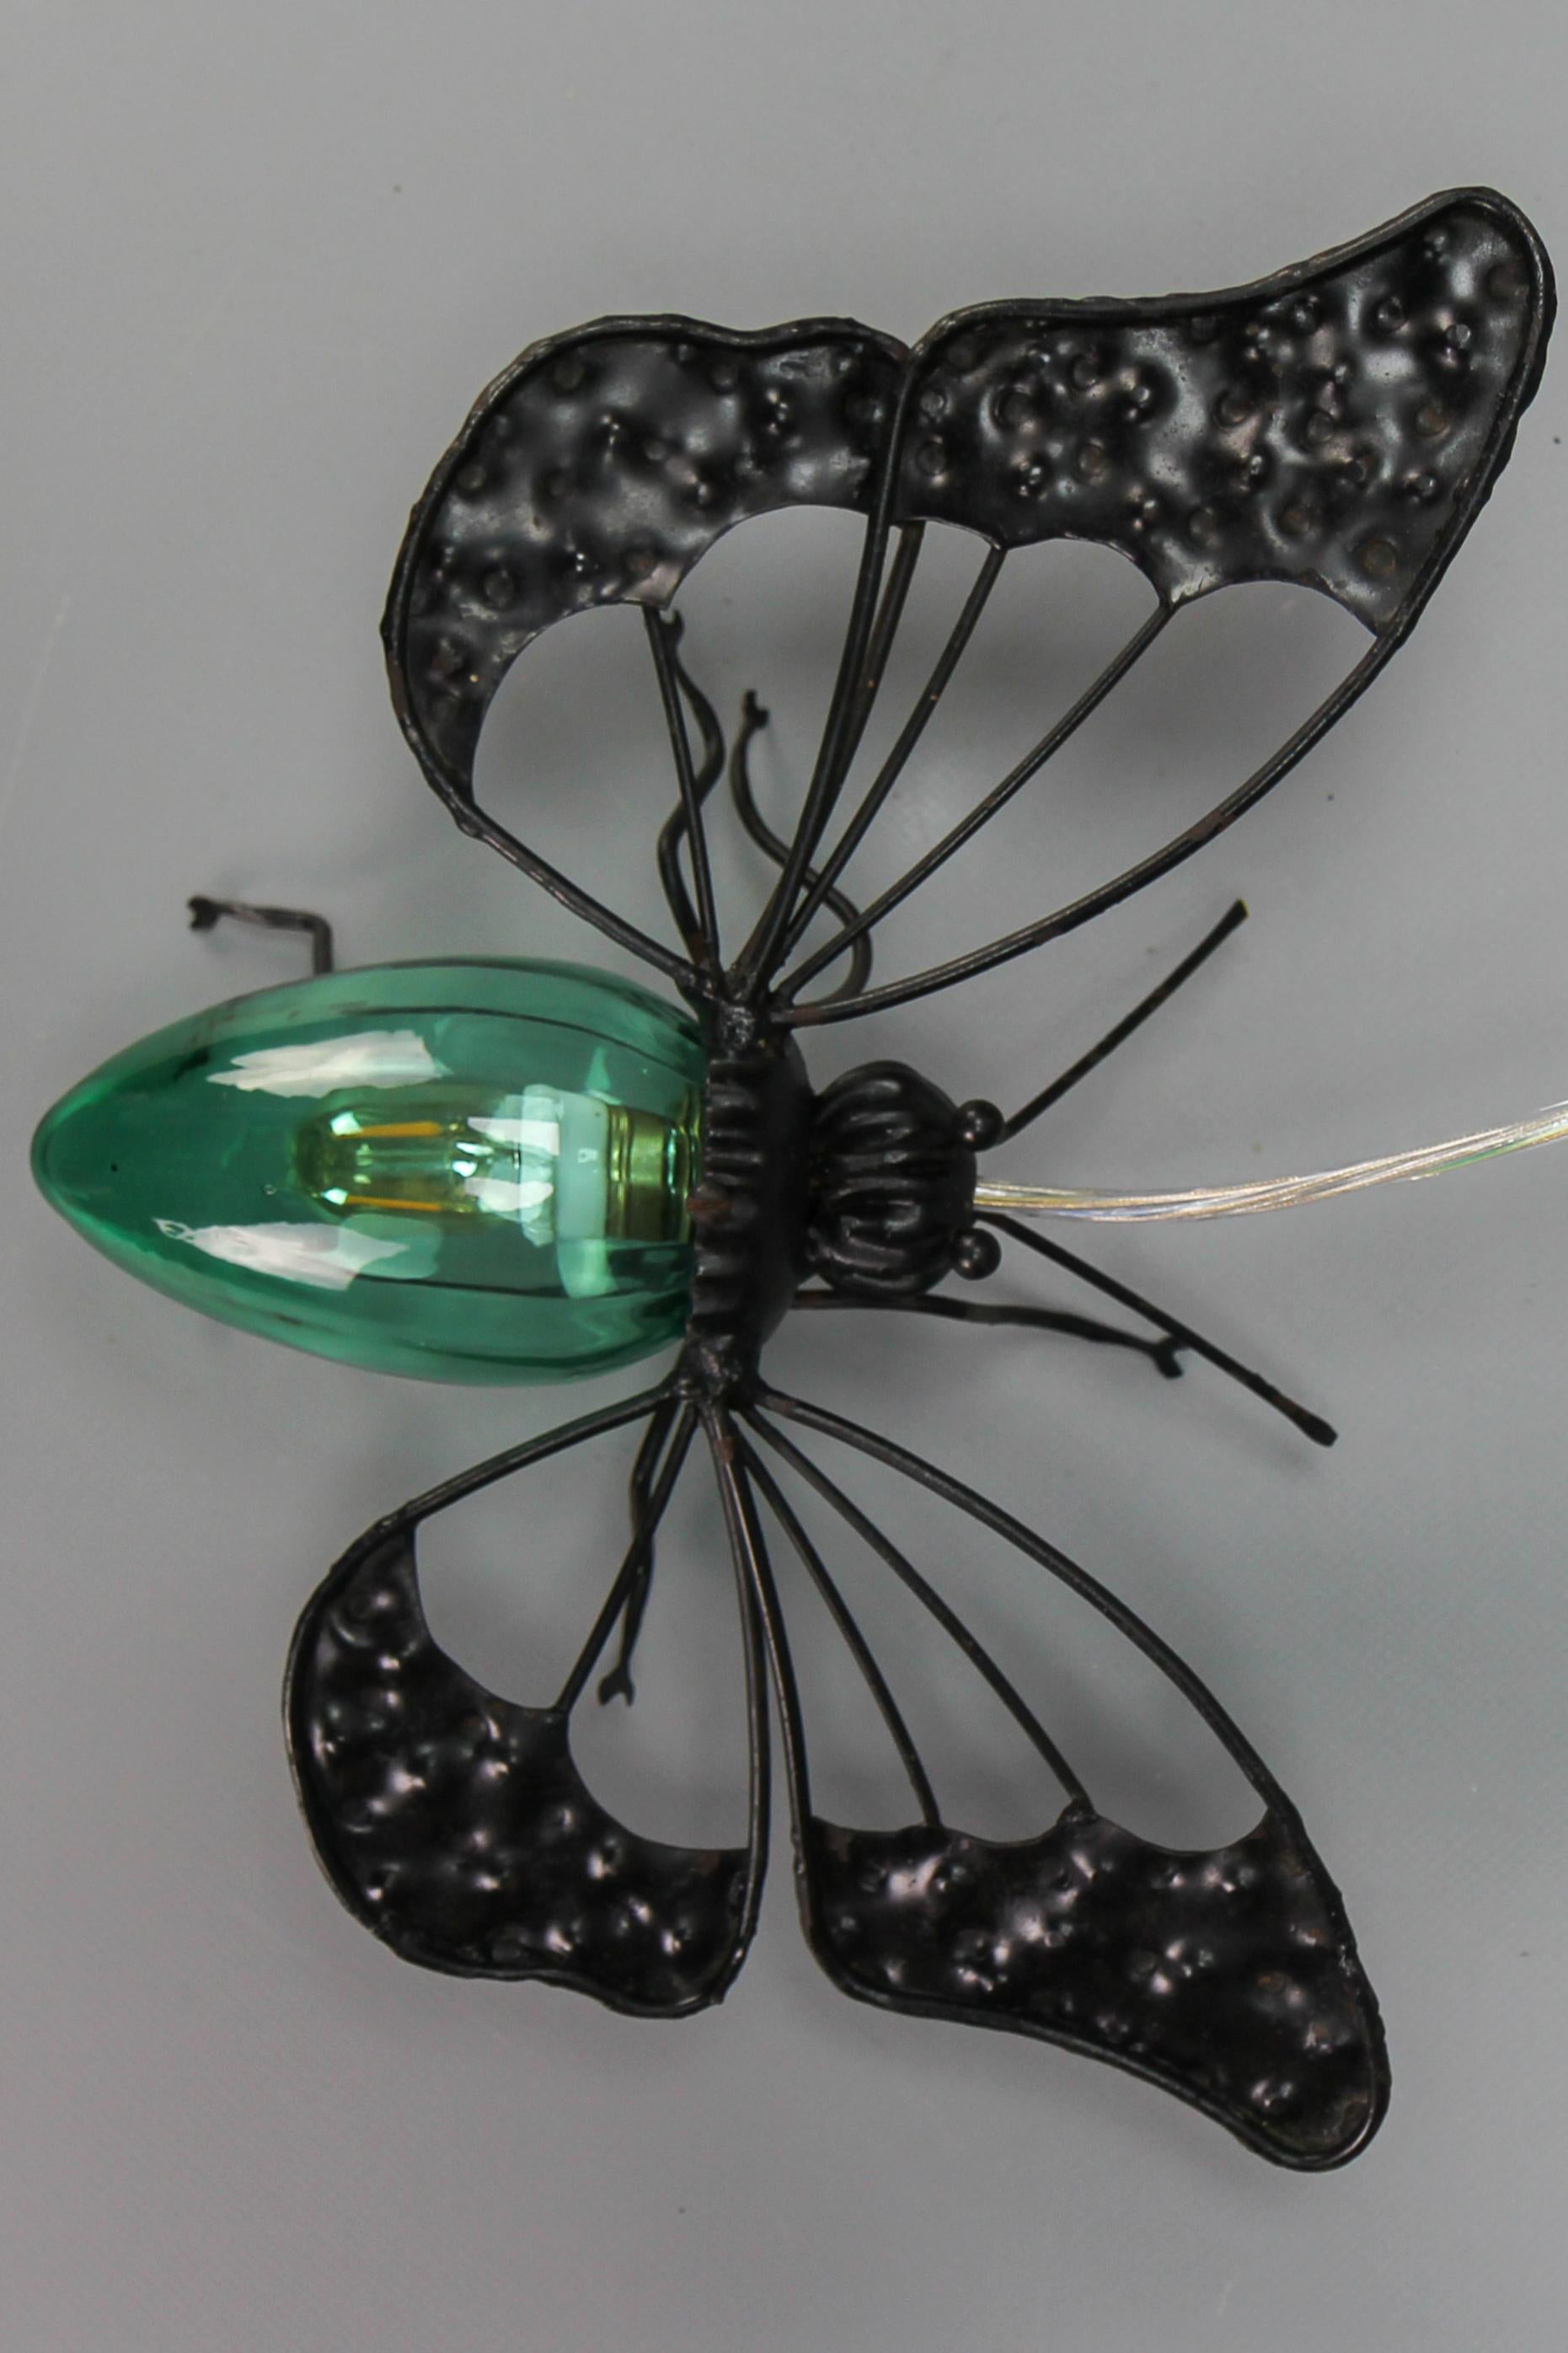 Mid-Century Modern metal and green Murano glass wall lamp butterfly, Italy, circa the 1960s.
An extraordinary and beautiful wall light from the 1960s. This vintage wall lamp is made in the shape of a butterfly with a black metal frame and adorable